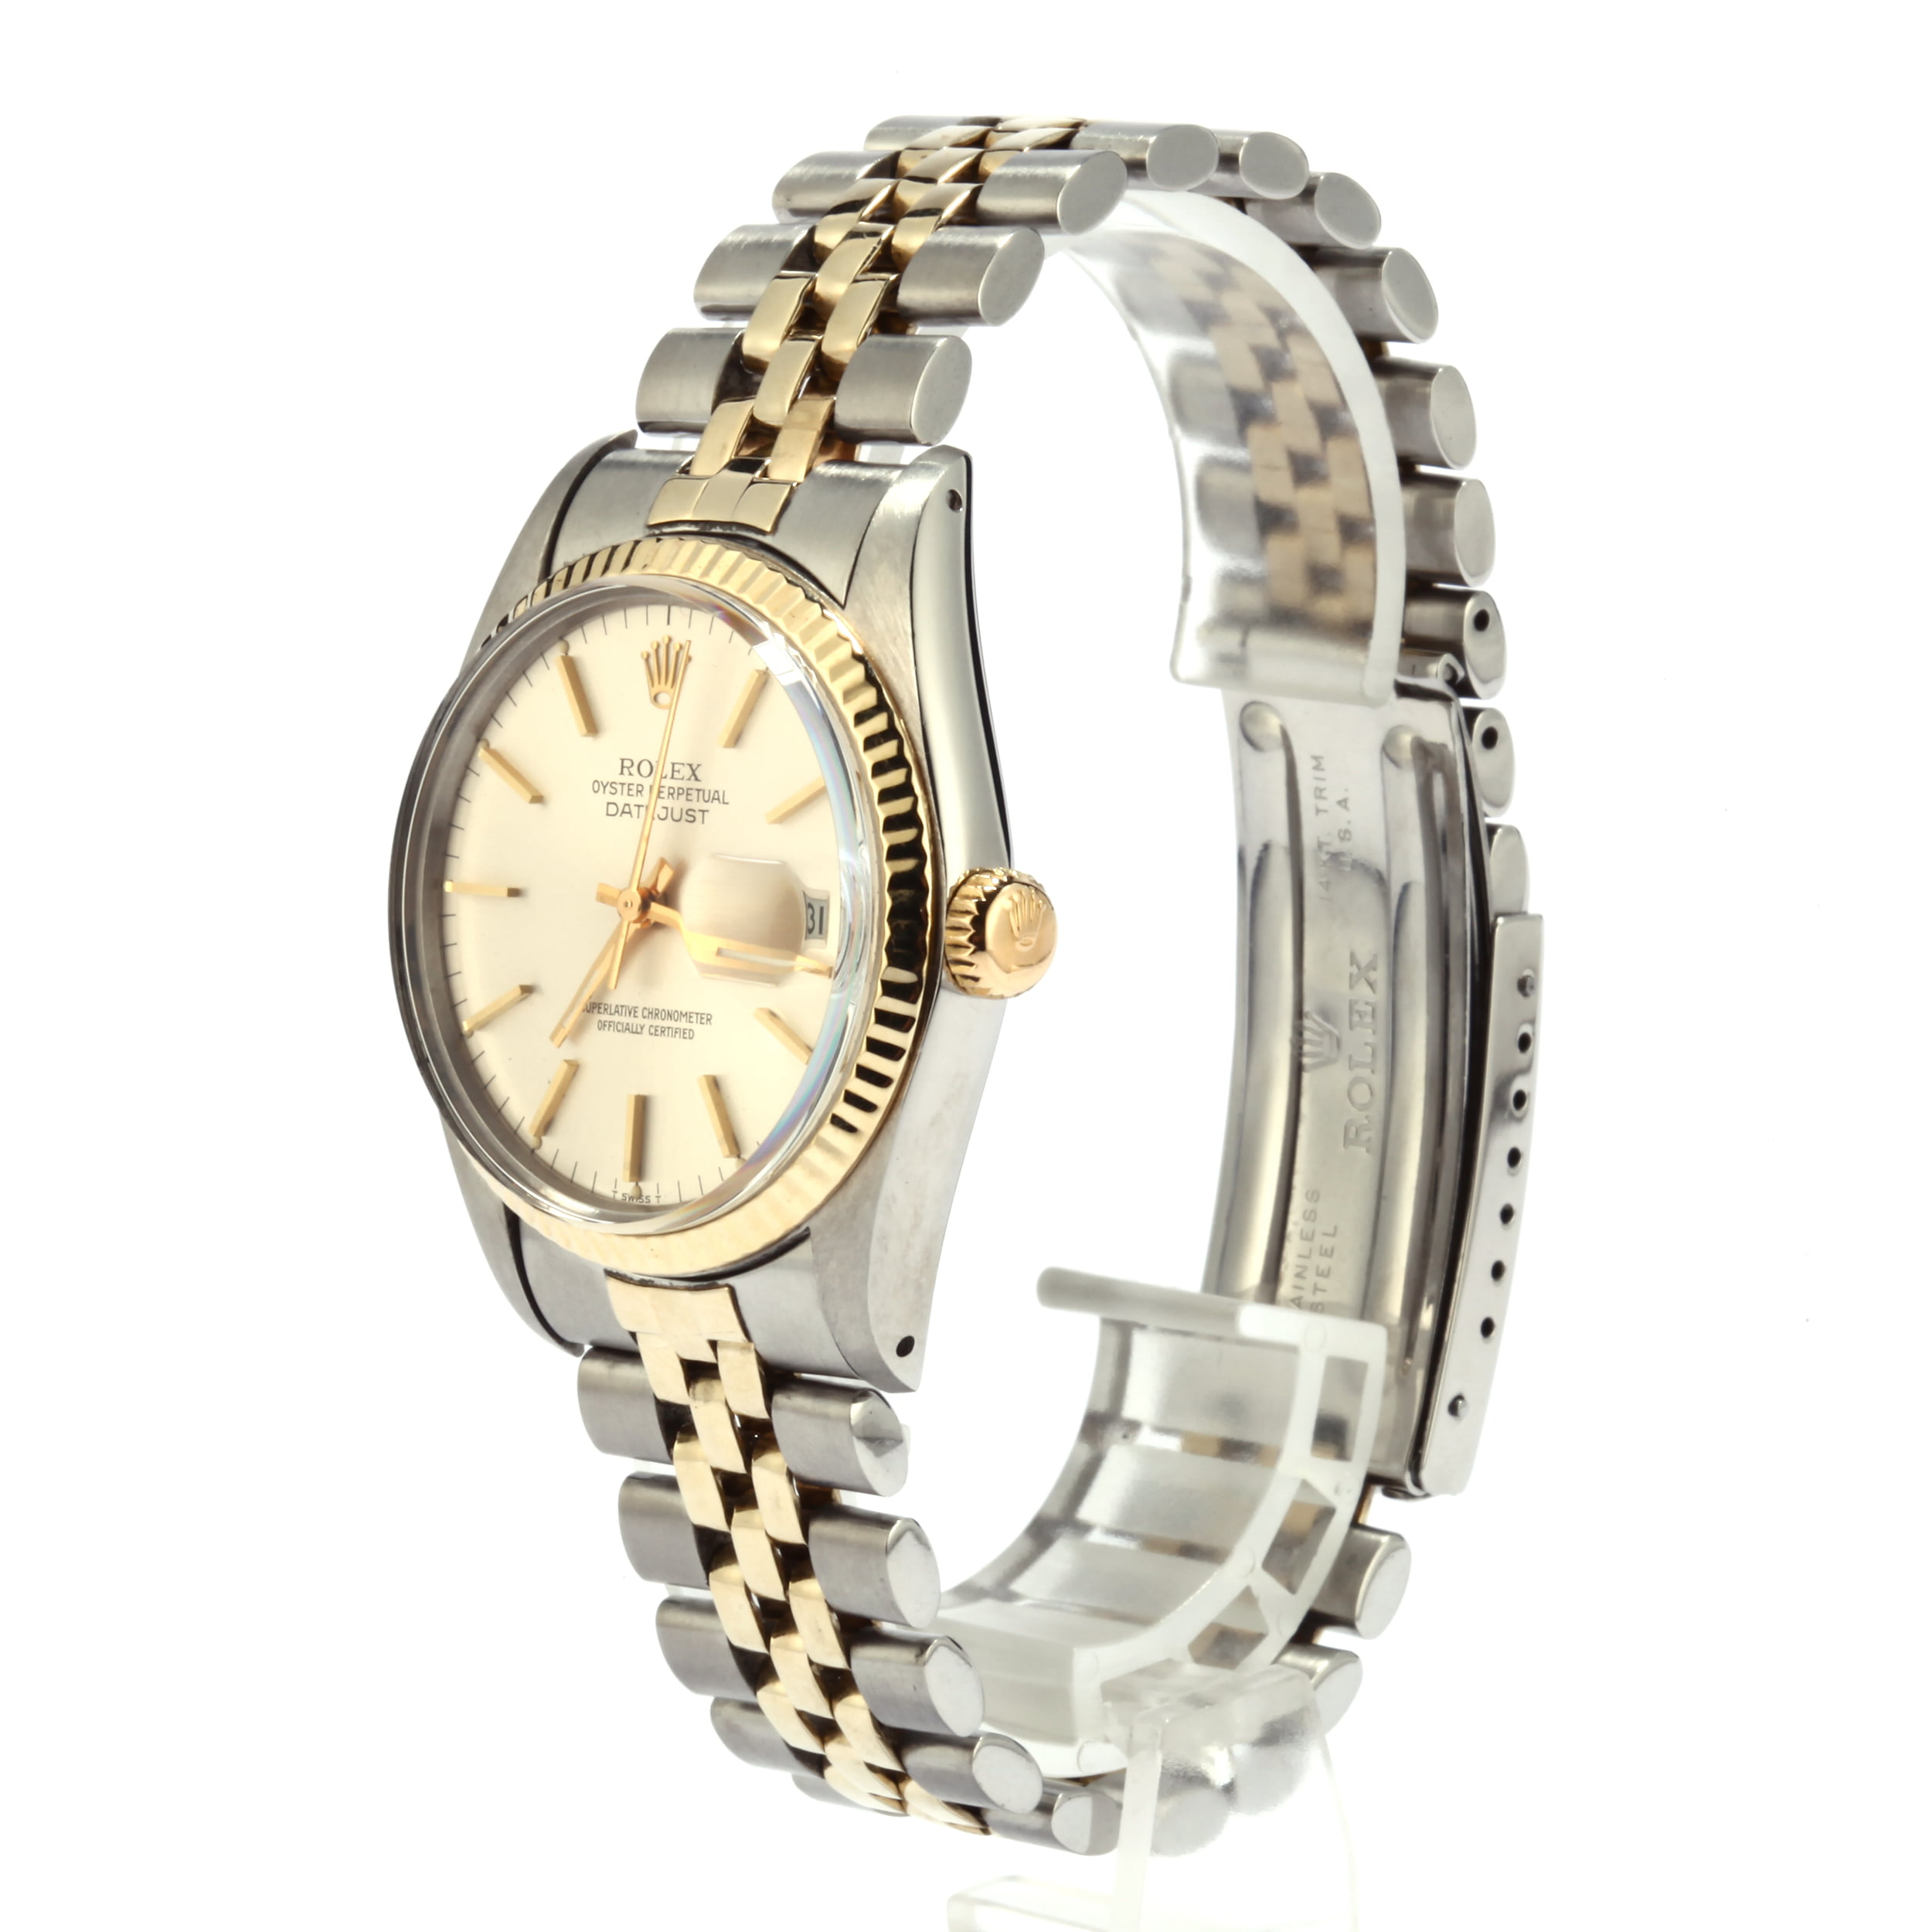 Used Rolex Datejust 16013 American Oval Link T